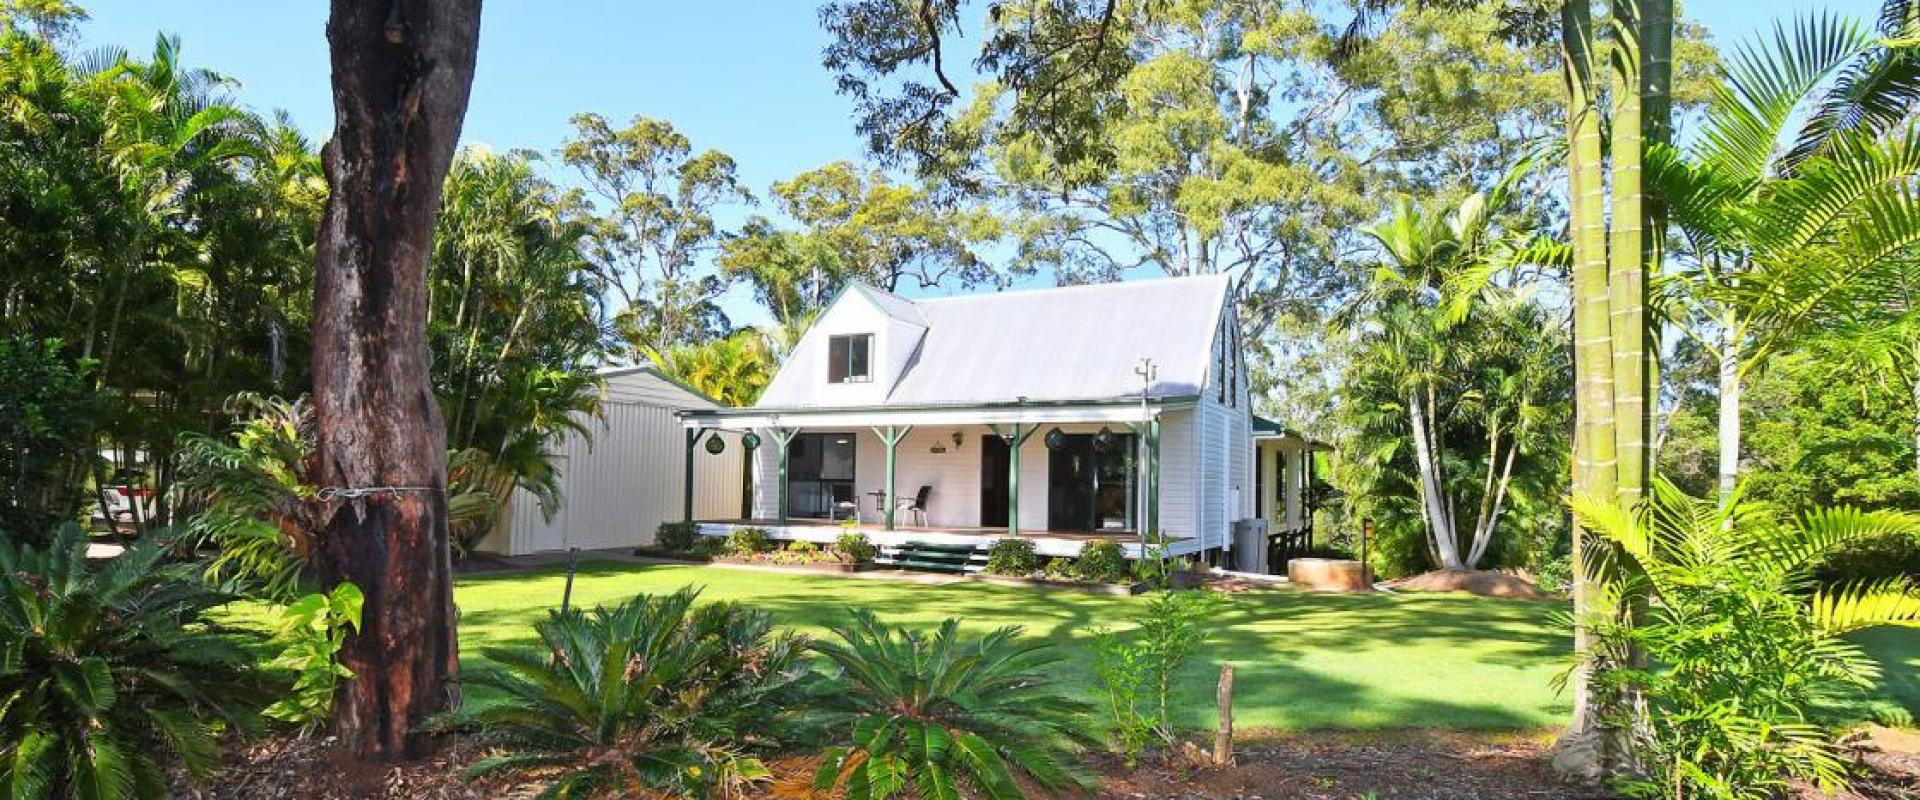 ELEVATED CHARACTER HOME SET IN A SYLVAN SETTING, OVERLOOKING AND WITH DIRECT ACCESS TO THE BURRUM RIVER - 2.5 ACRES OF WELL MANICURED PRIVATE GROUNDS.